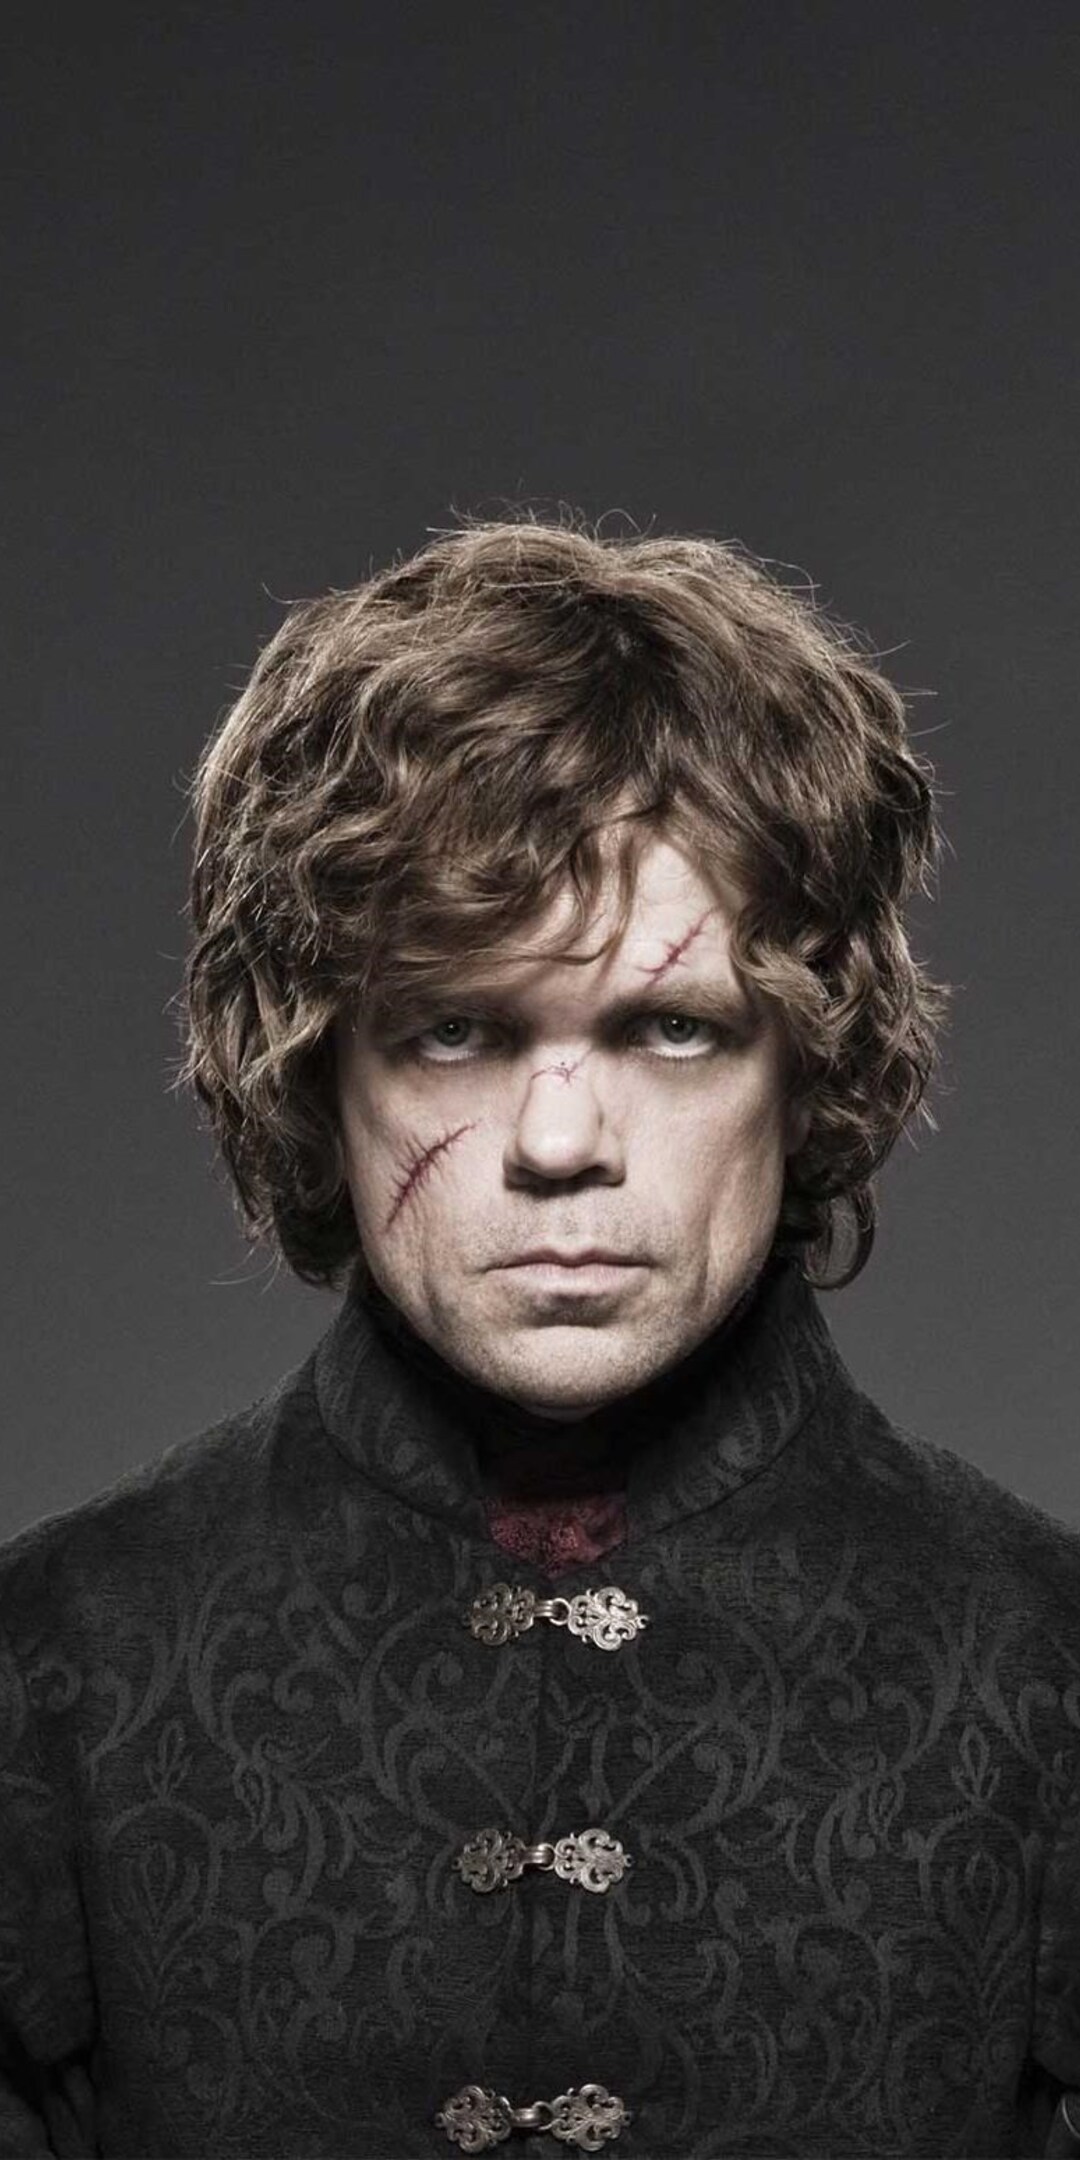 tyrion-lannister-game-of-thrones-new.jpg